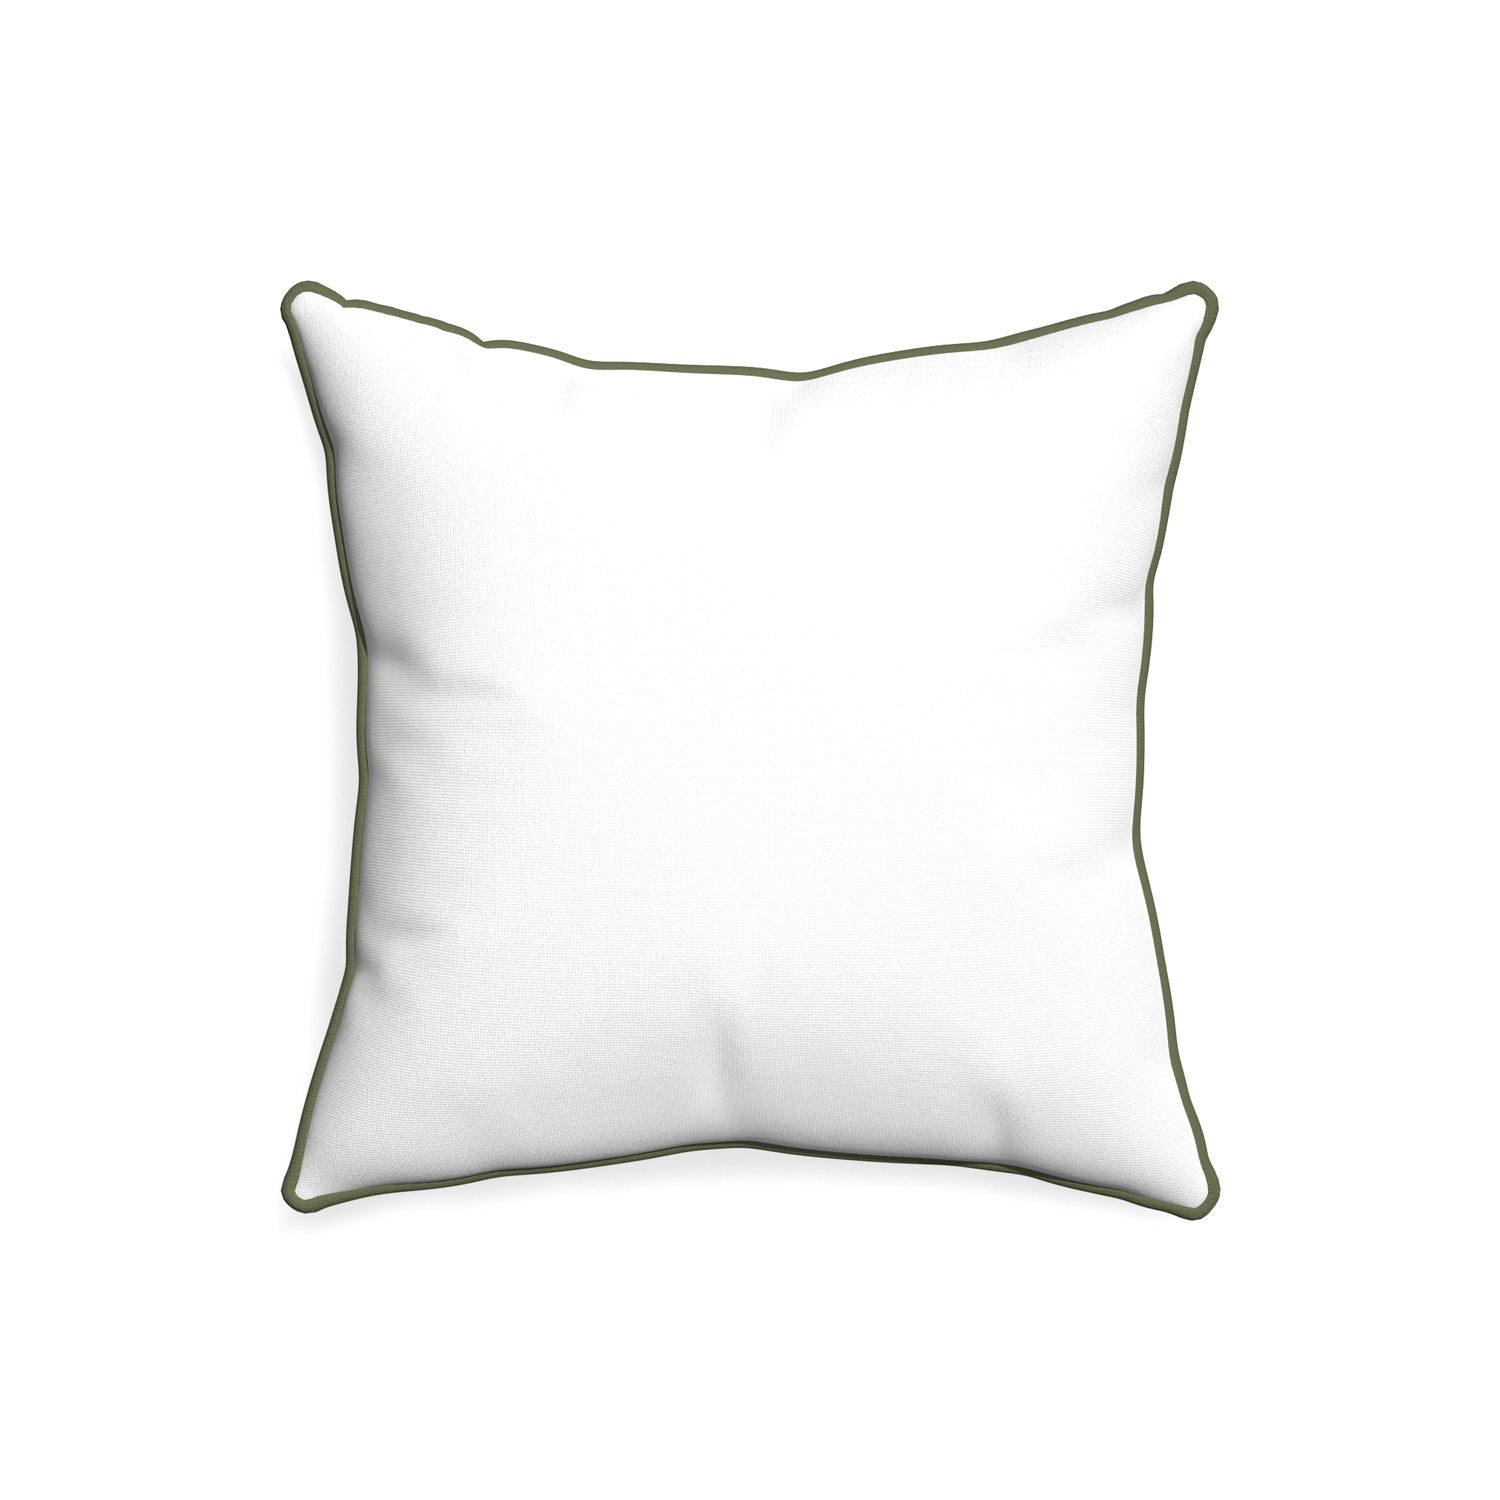 20-square snow custom pillow with f piping on white background